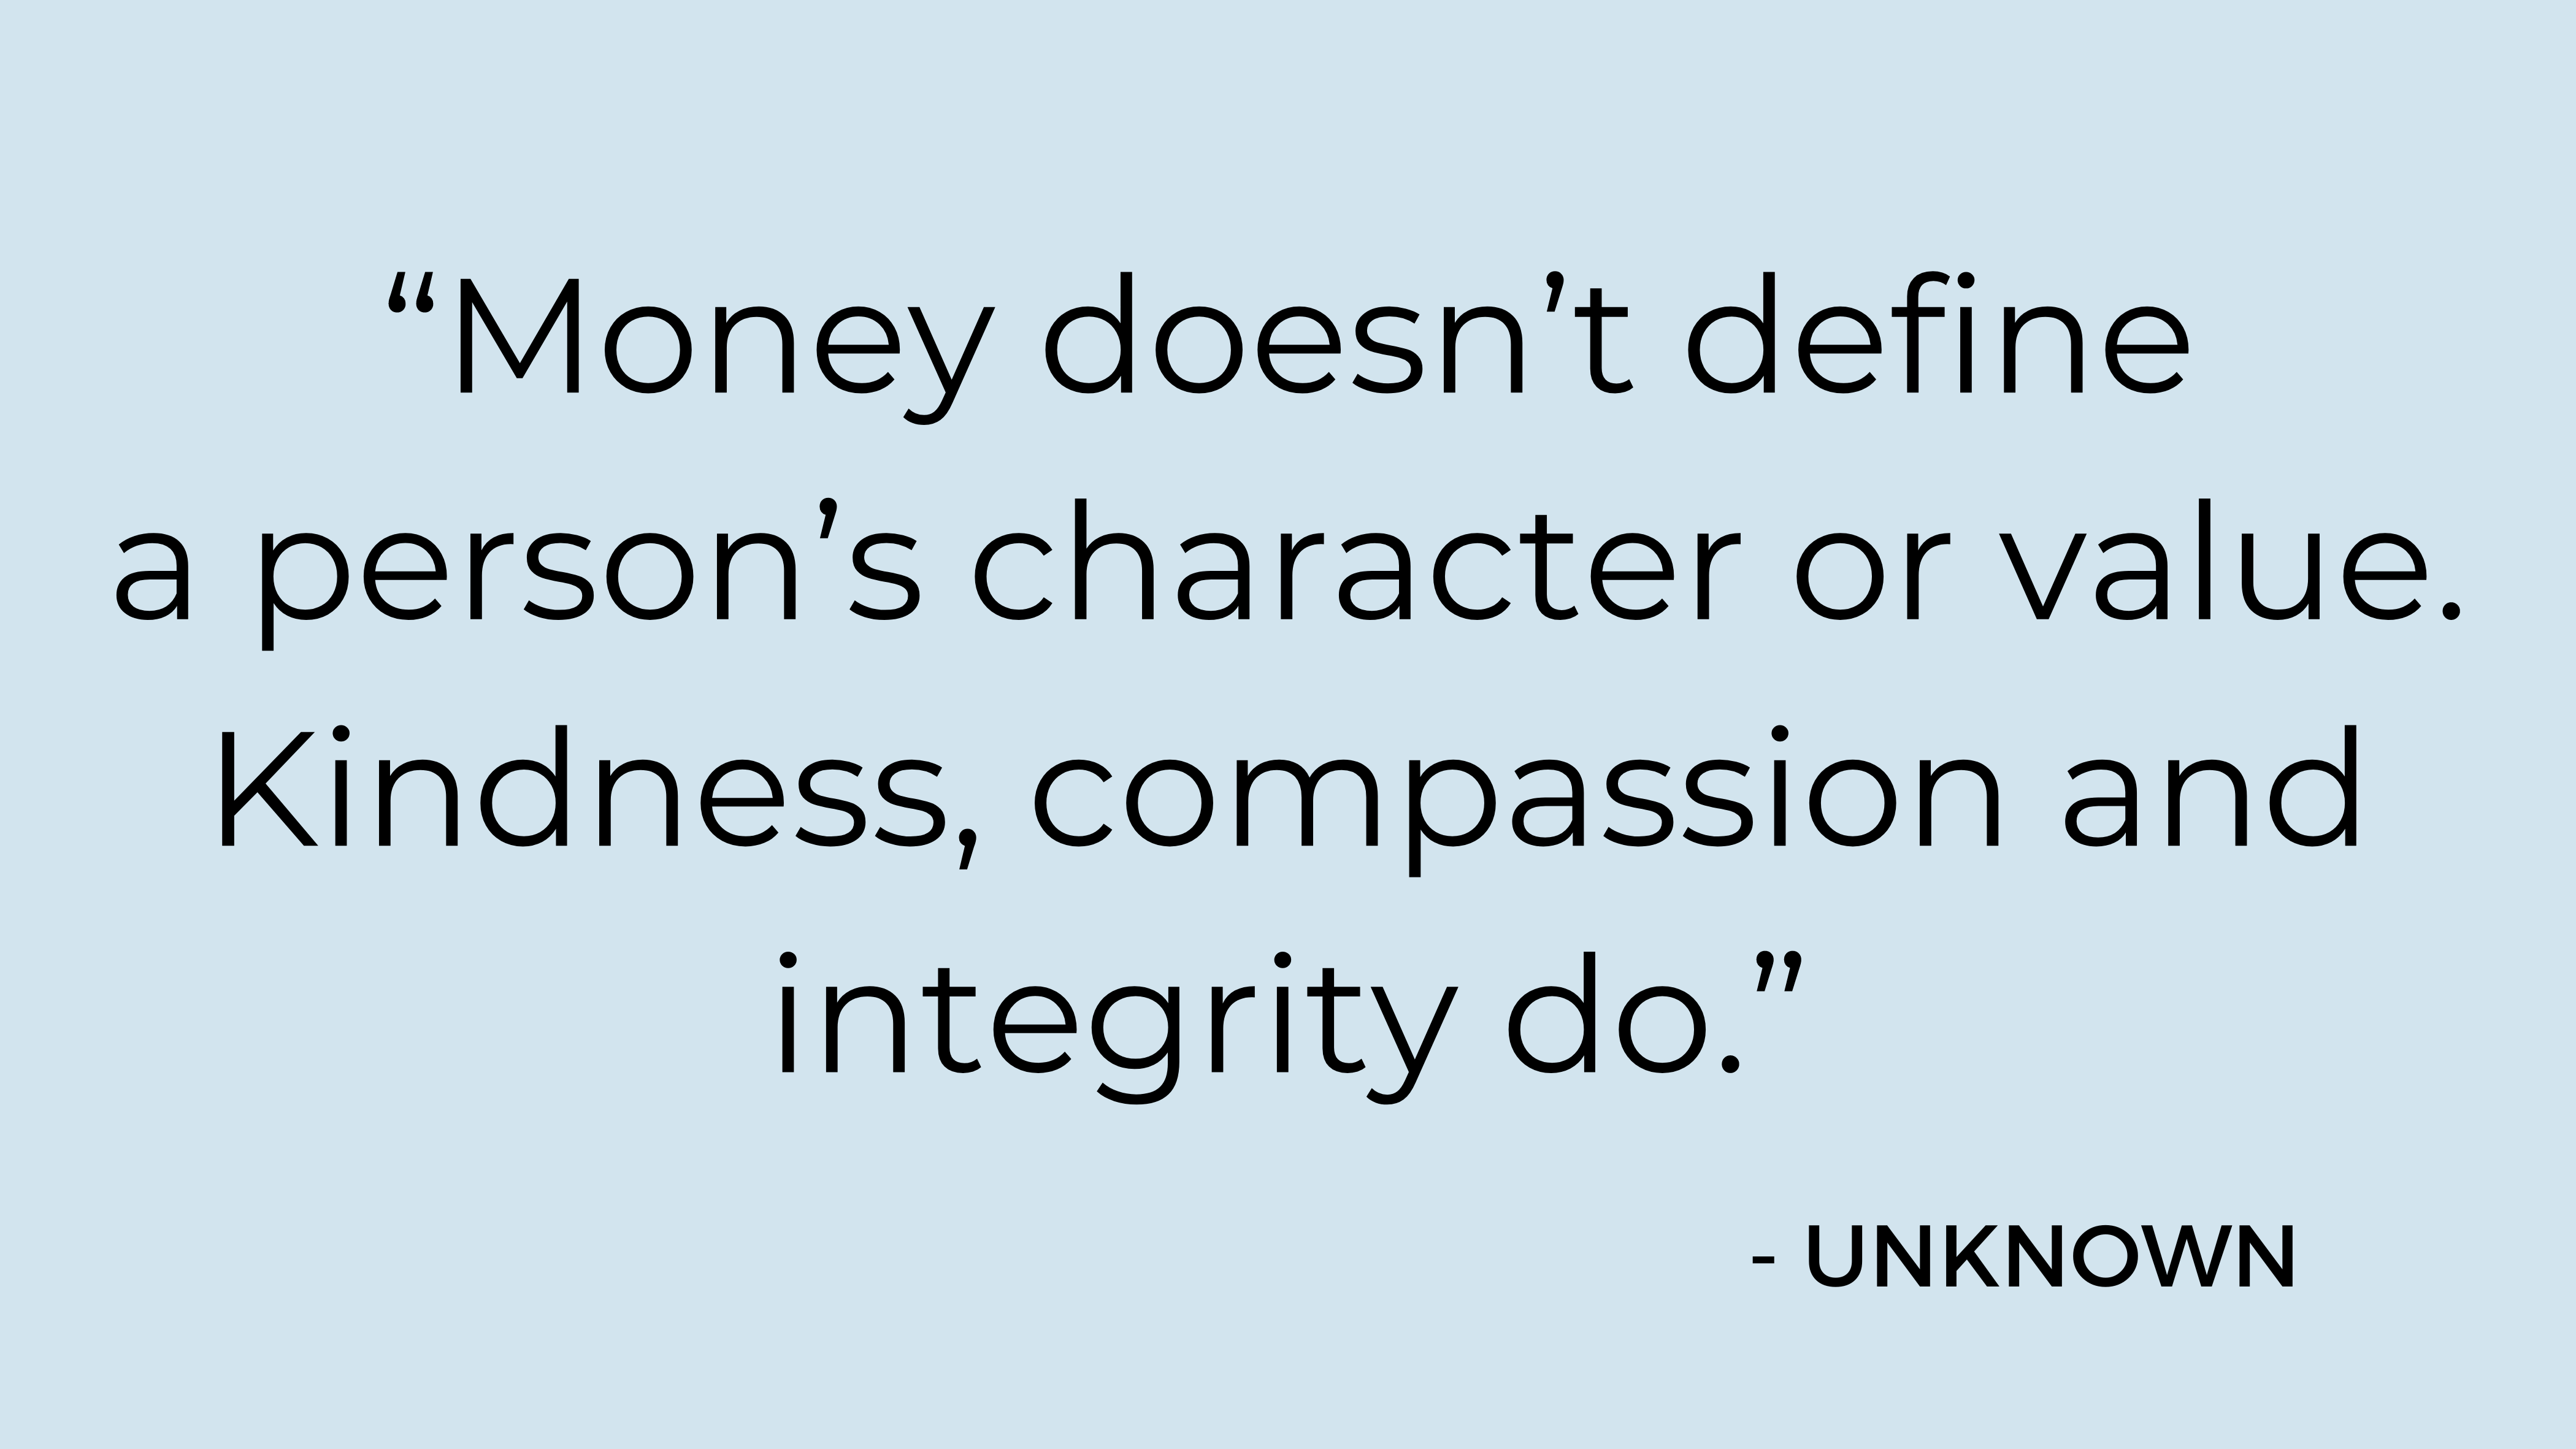 "Money doesn't define a person's character or value. Kindness, compassion, and integrity do." - Unknown